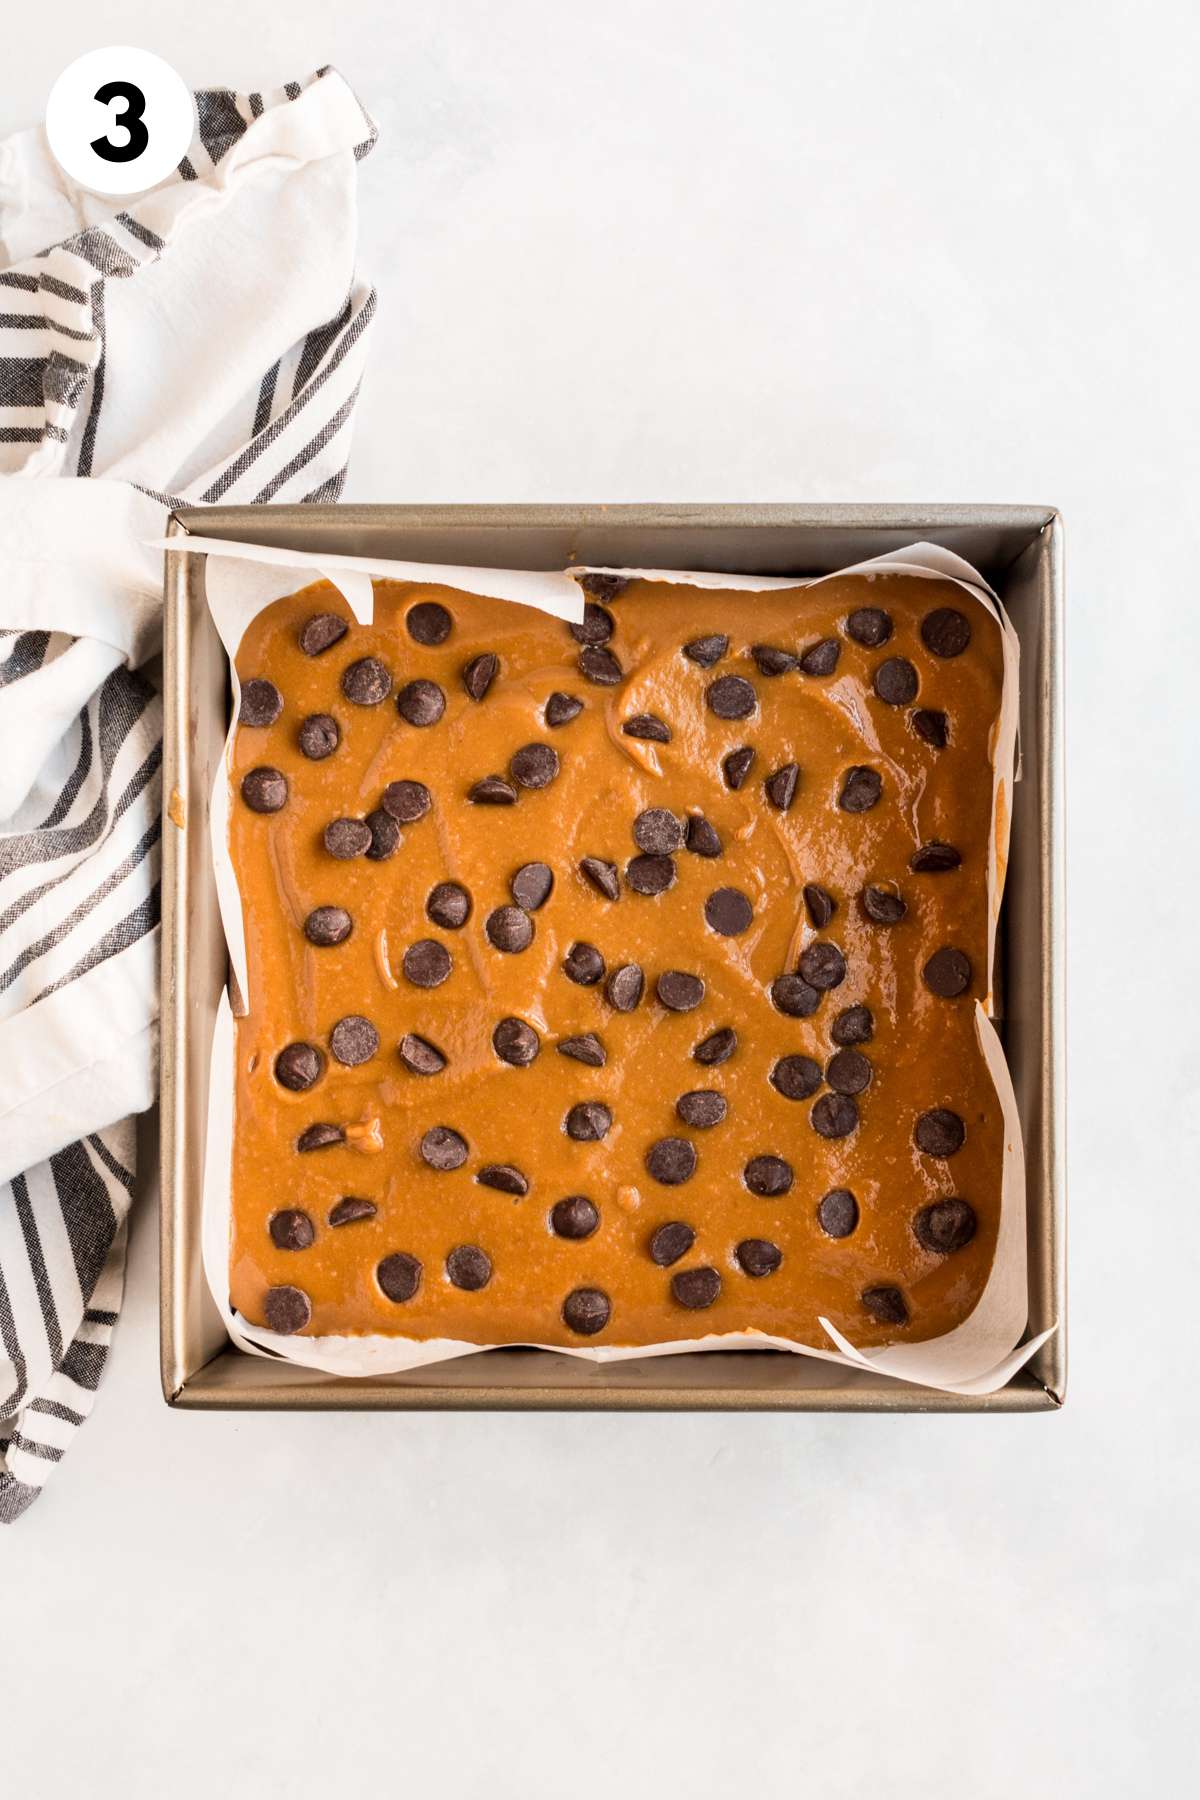 Pumpkin protein bar mixture in a baking pan topped with chocolate chips.